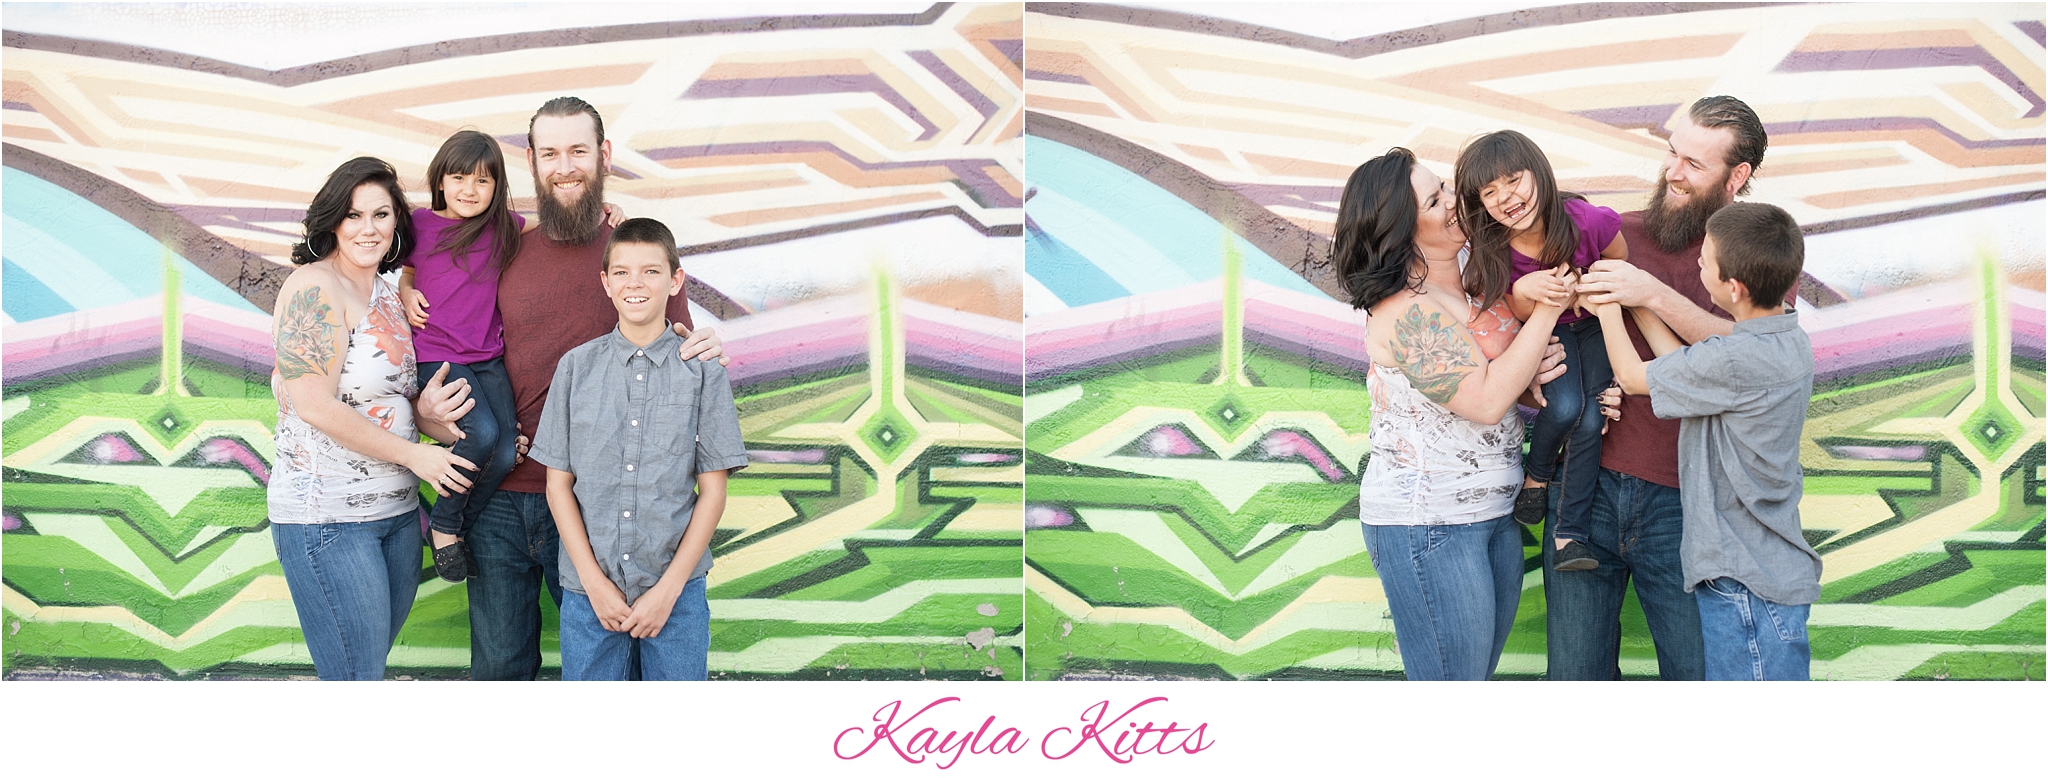 kayla kitts photography - albuquerque wedding photographer - albuquerque engagement photographer - nm wedding - albuquerque wedding - nm wedding - unm engagement - bosque engagement session_0001.jpg